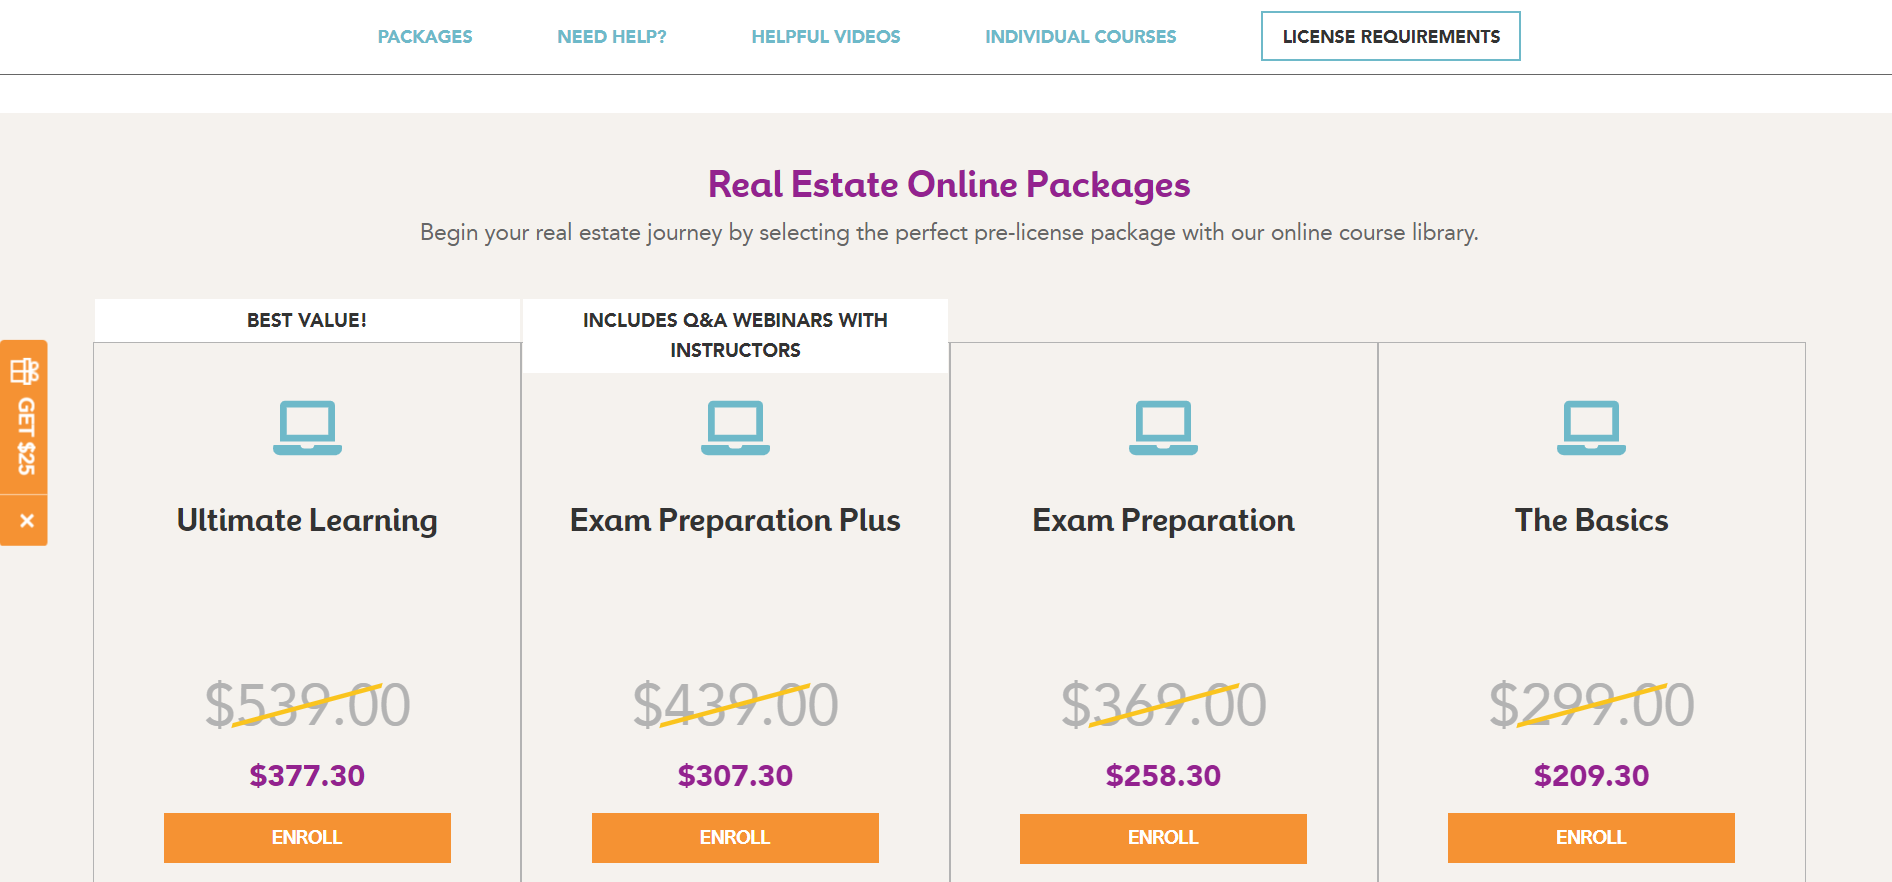 Advertisement for the Real Estate Online Packages course from RealEstateExpress.